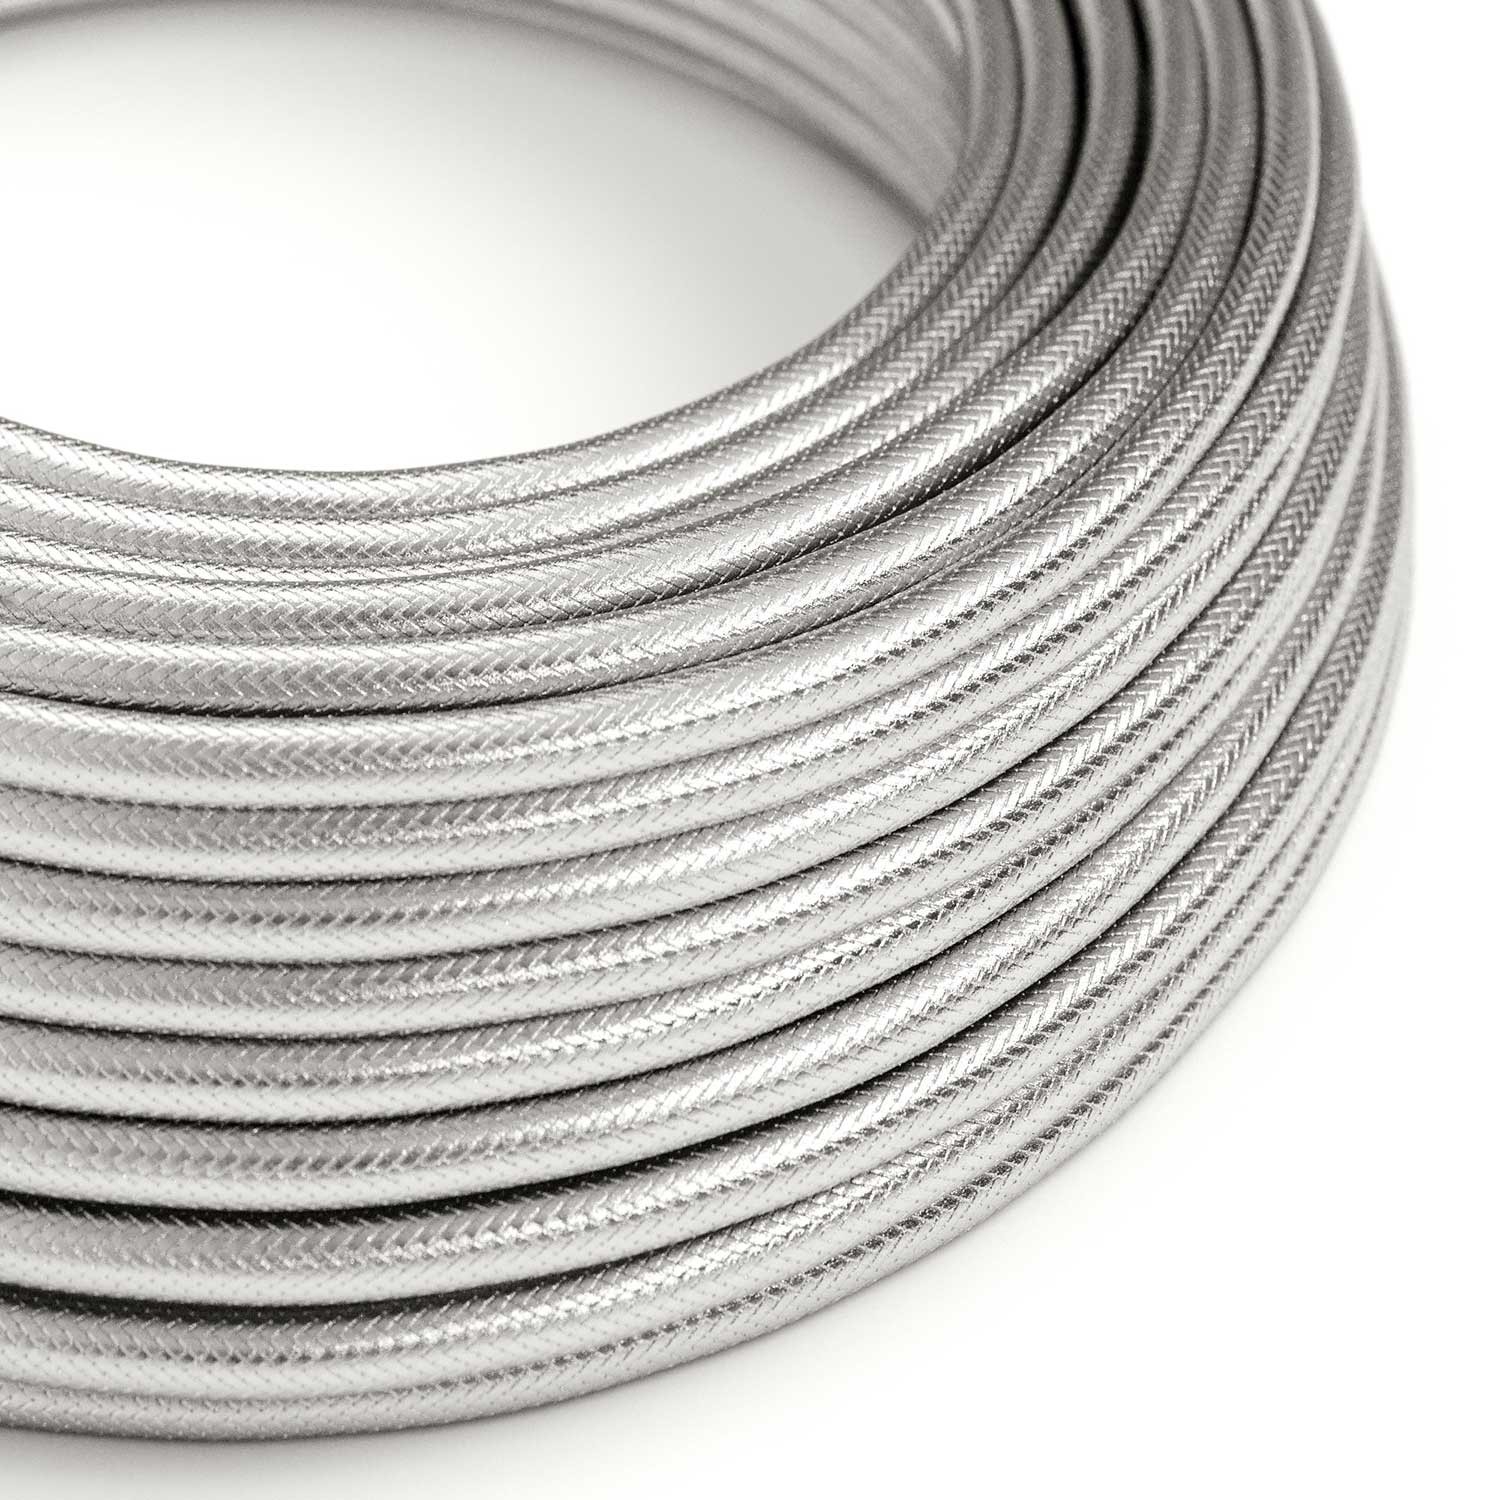 Steel Metal Braided Cord - Round 3-Wire Cable - PER FOOT